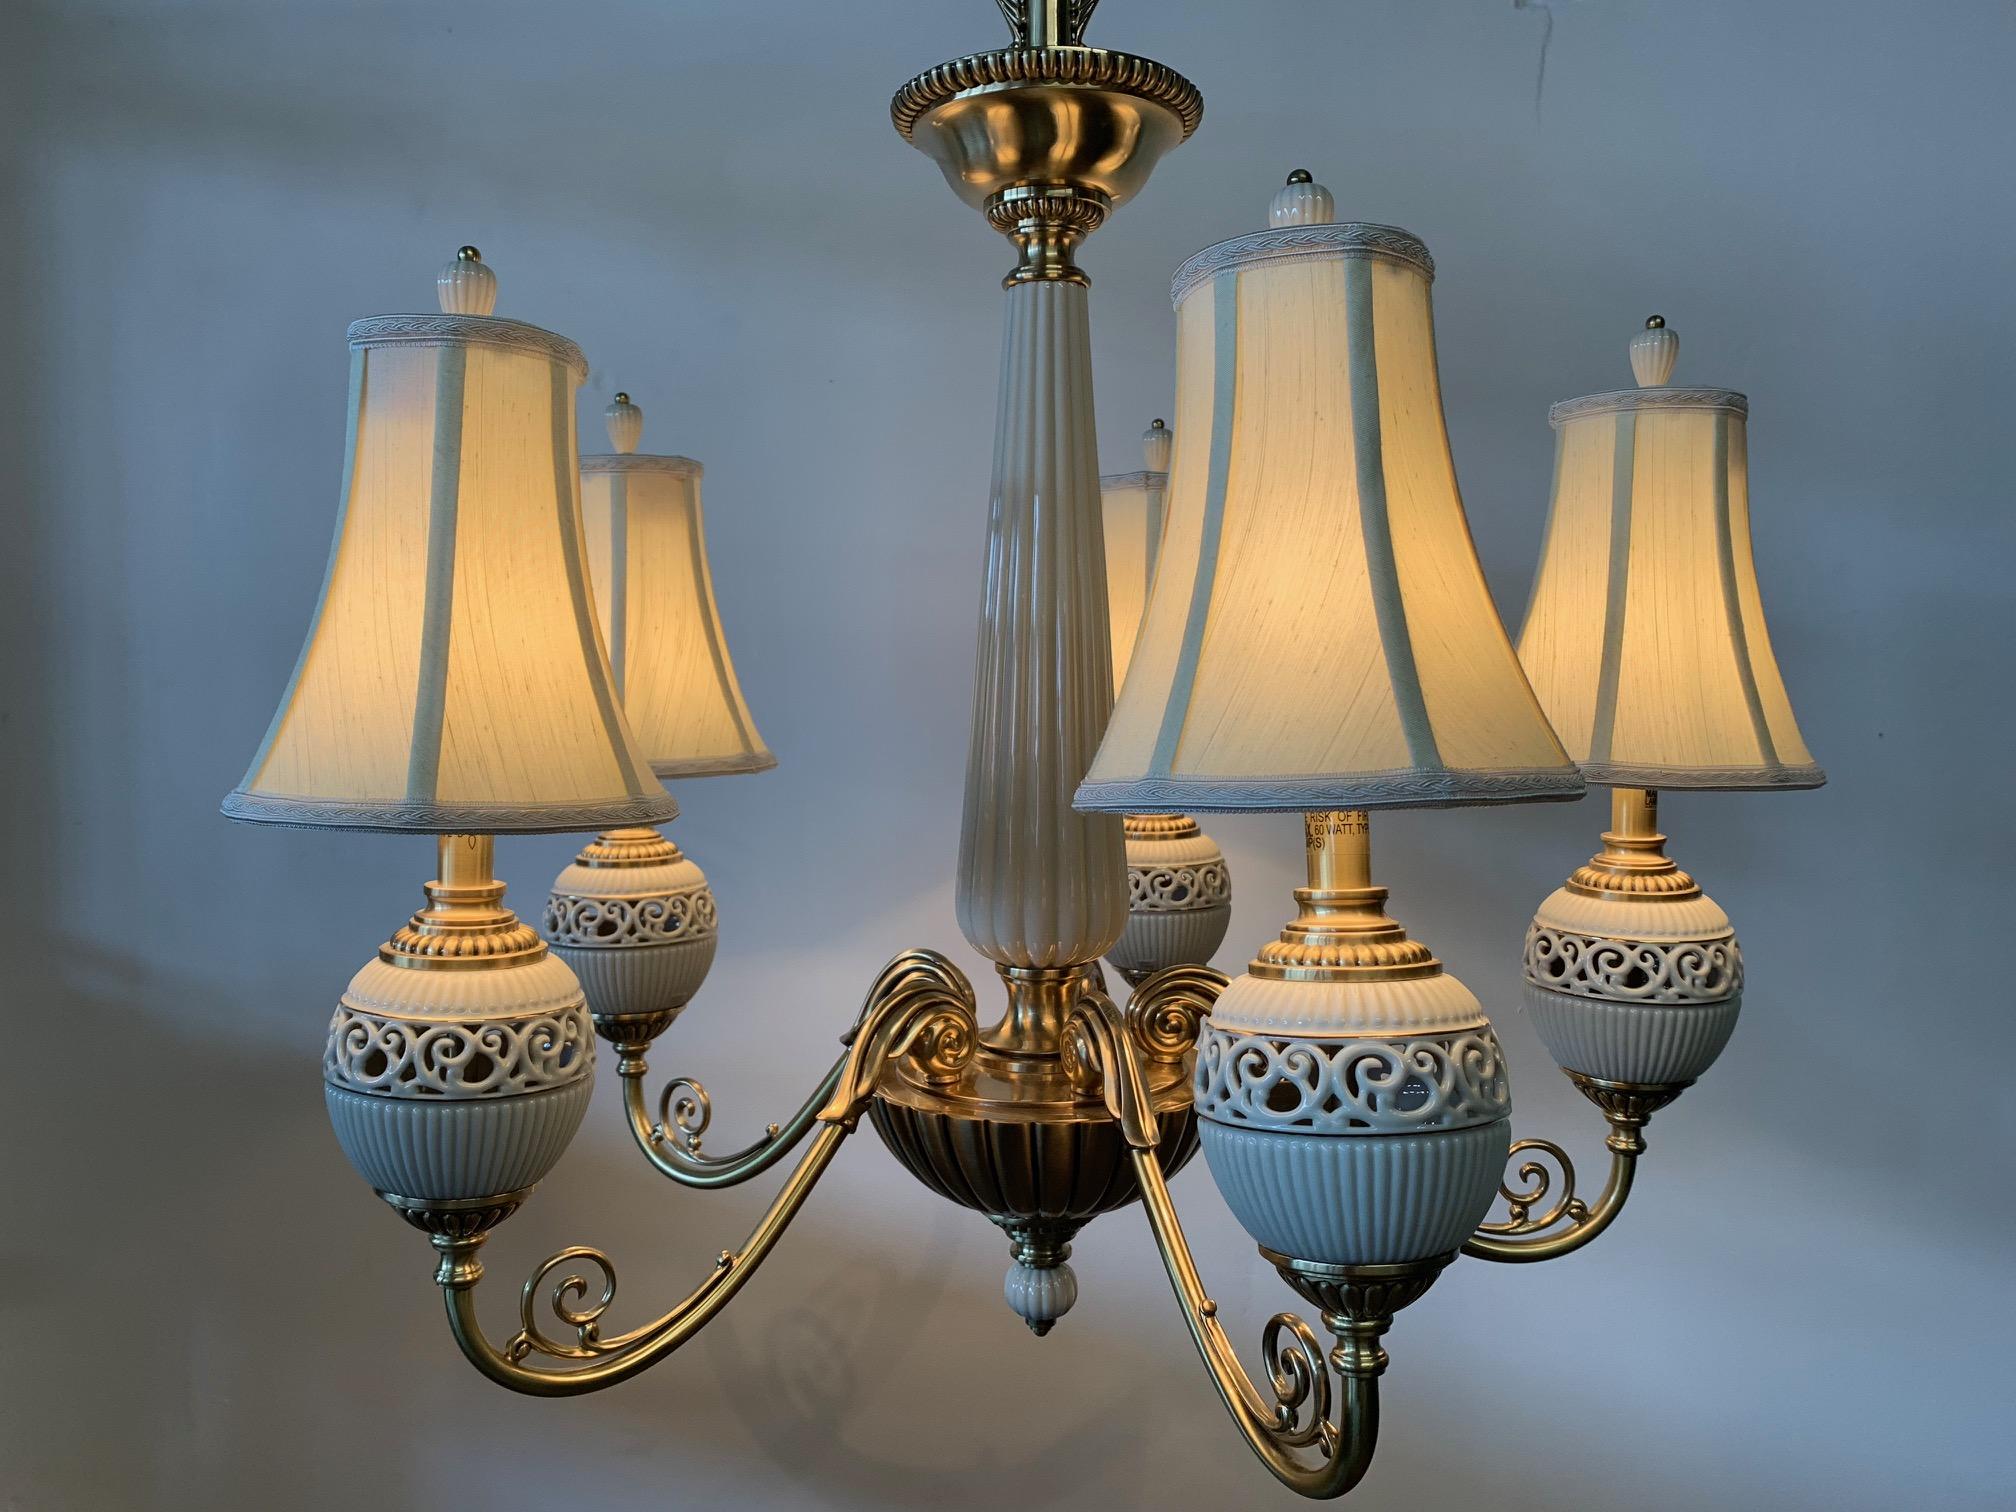 5-light chandelier by Lenox features solid brass with ceramic accents and sculptural shades. Excellent condition with only one minor abrasion that is unseen when hanging (see last photo).